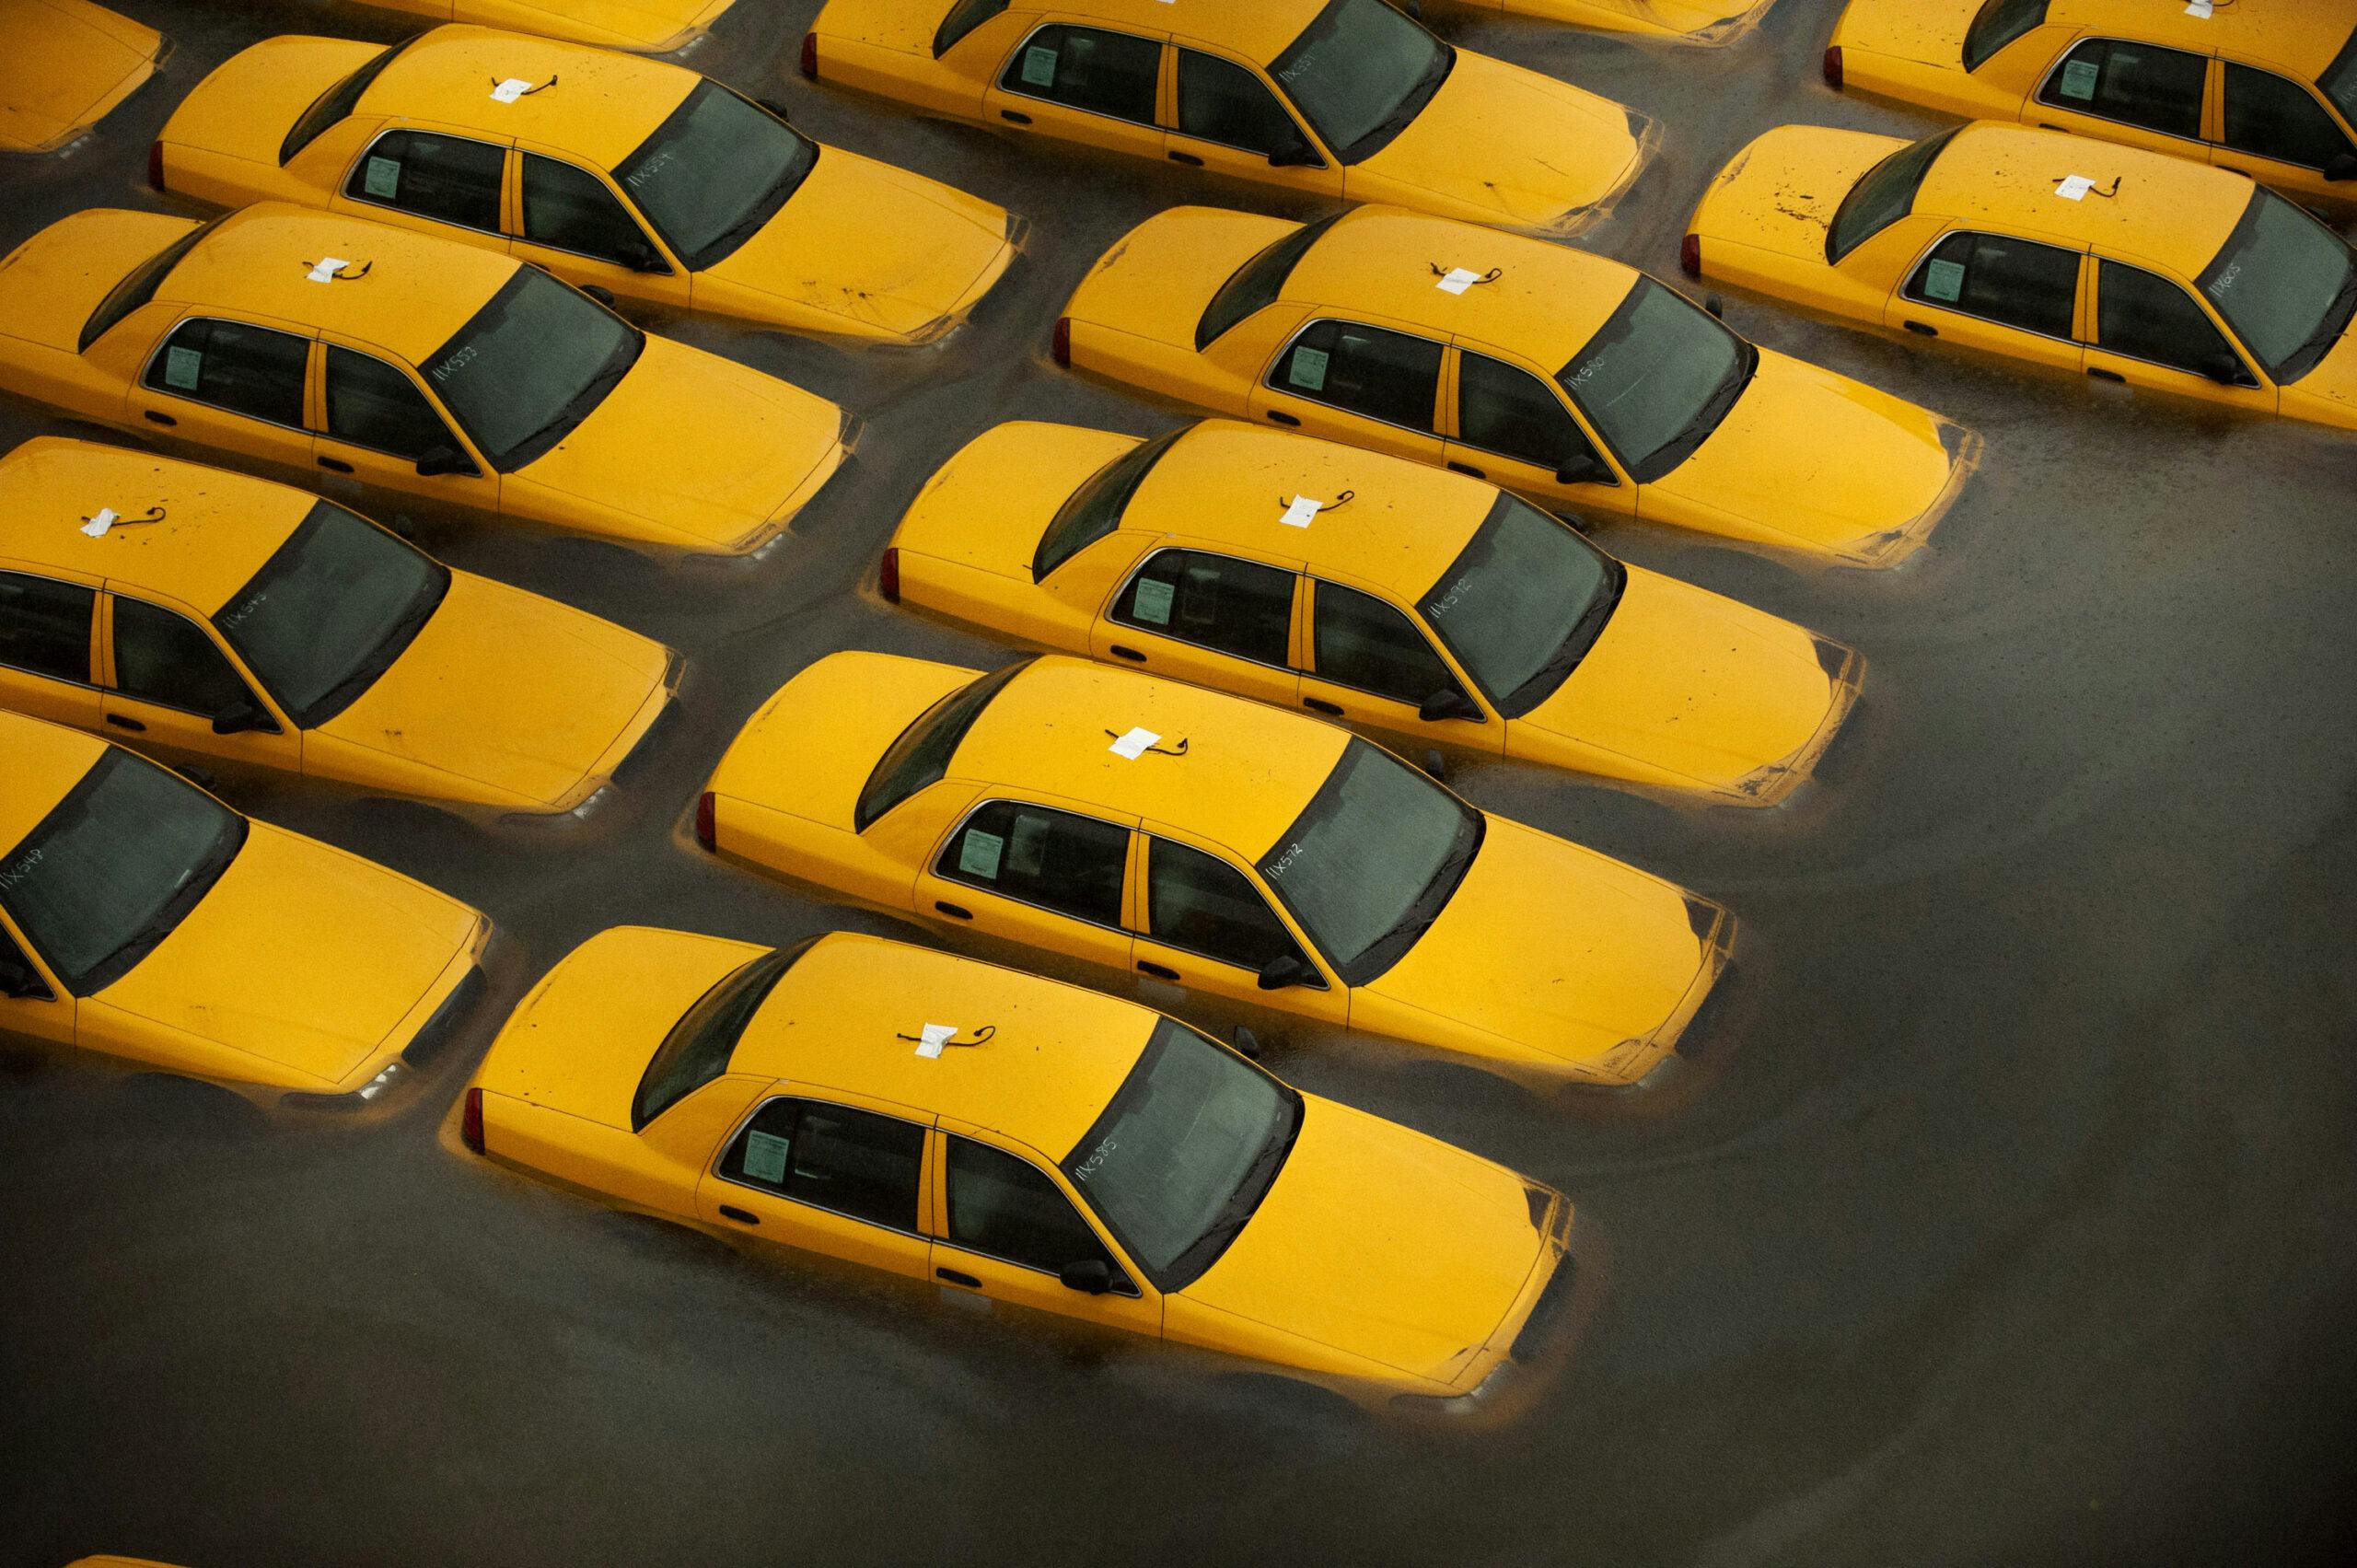 Hurricane Sandy New York City Crown Vic cabs underwater high angle fronts